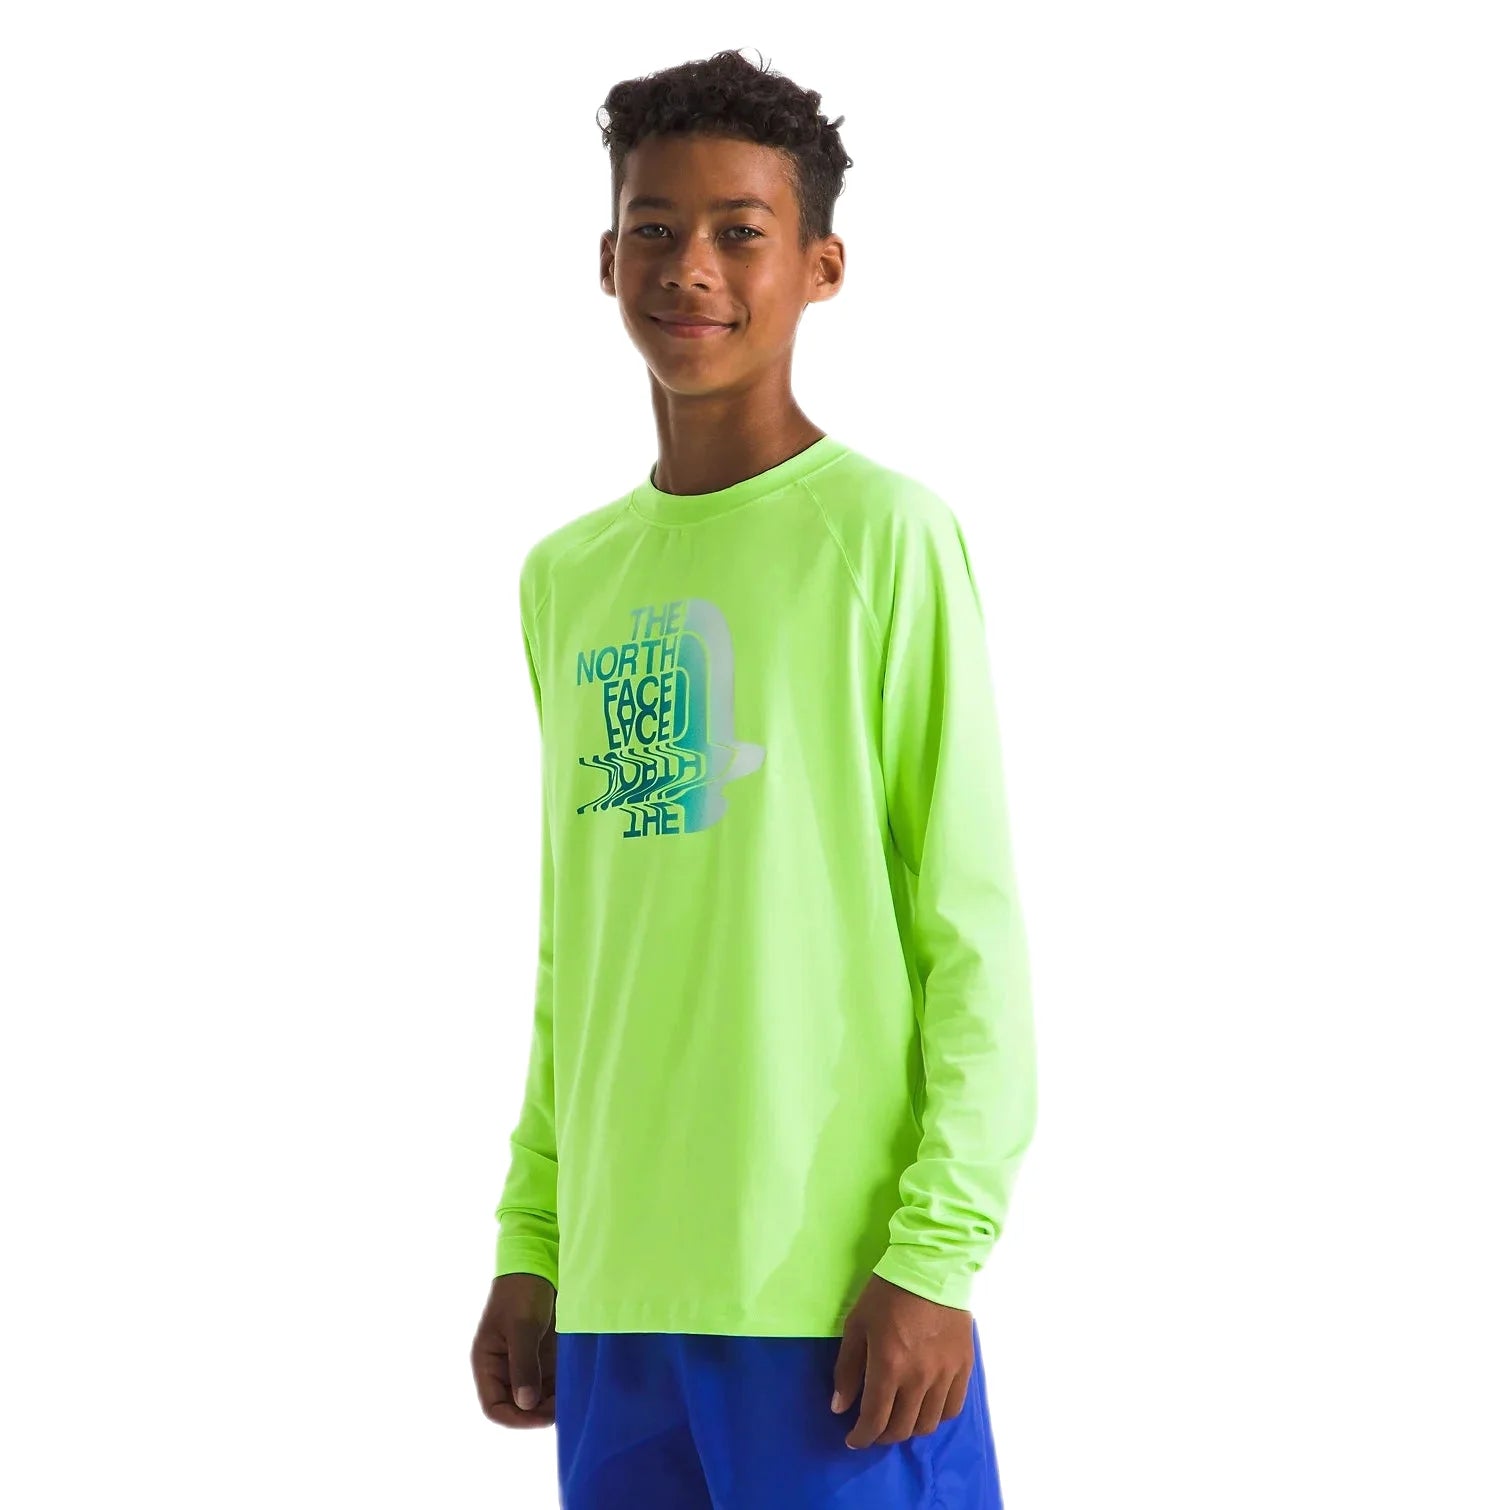 The North Face Boys’ Amphibious Long-Sleeve Sun Tee Safety Green Model Side